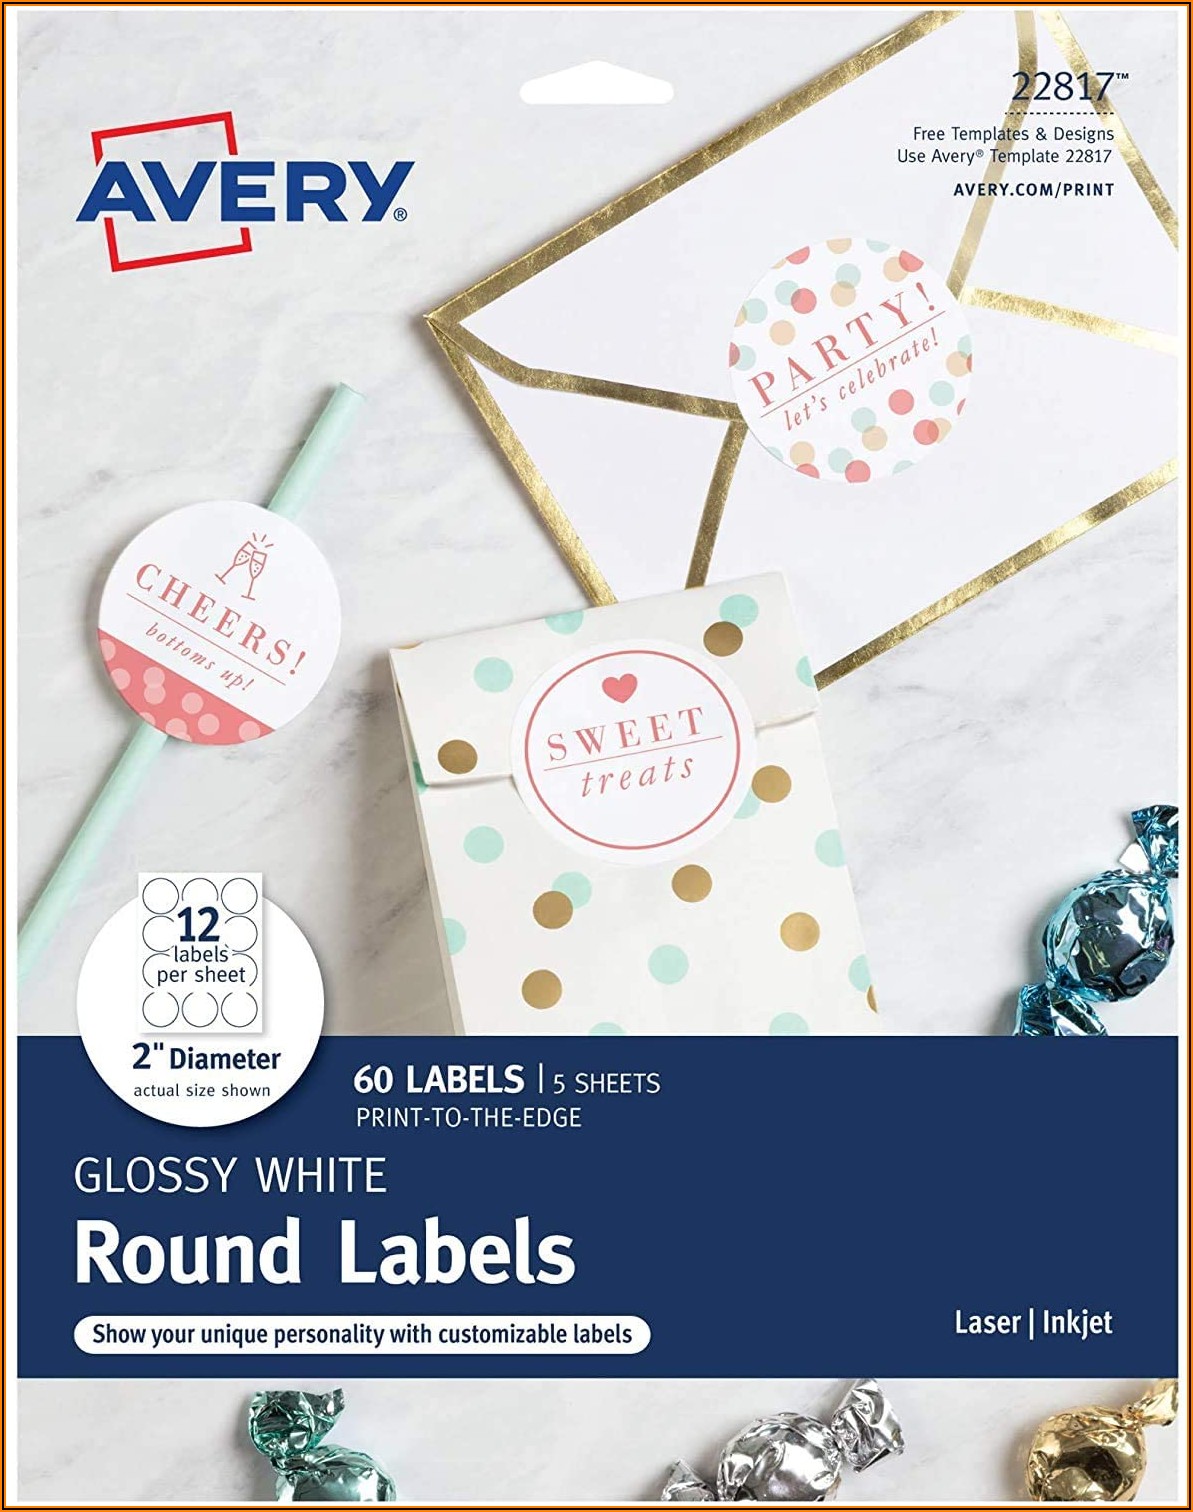 Avery Round Labels Template 22817